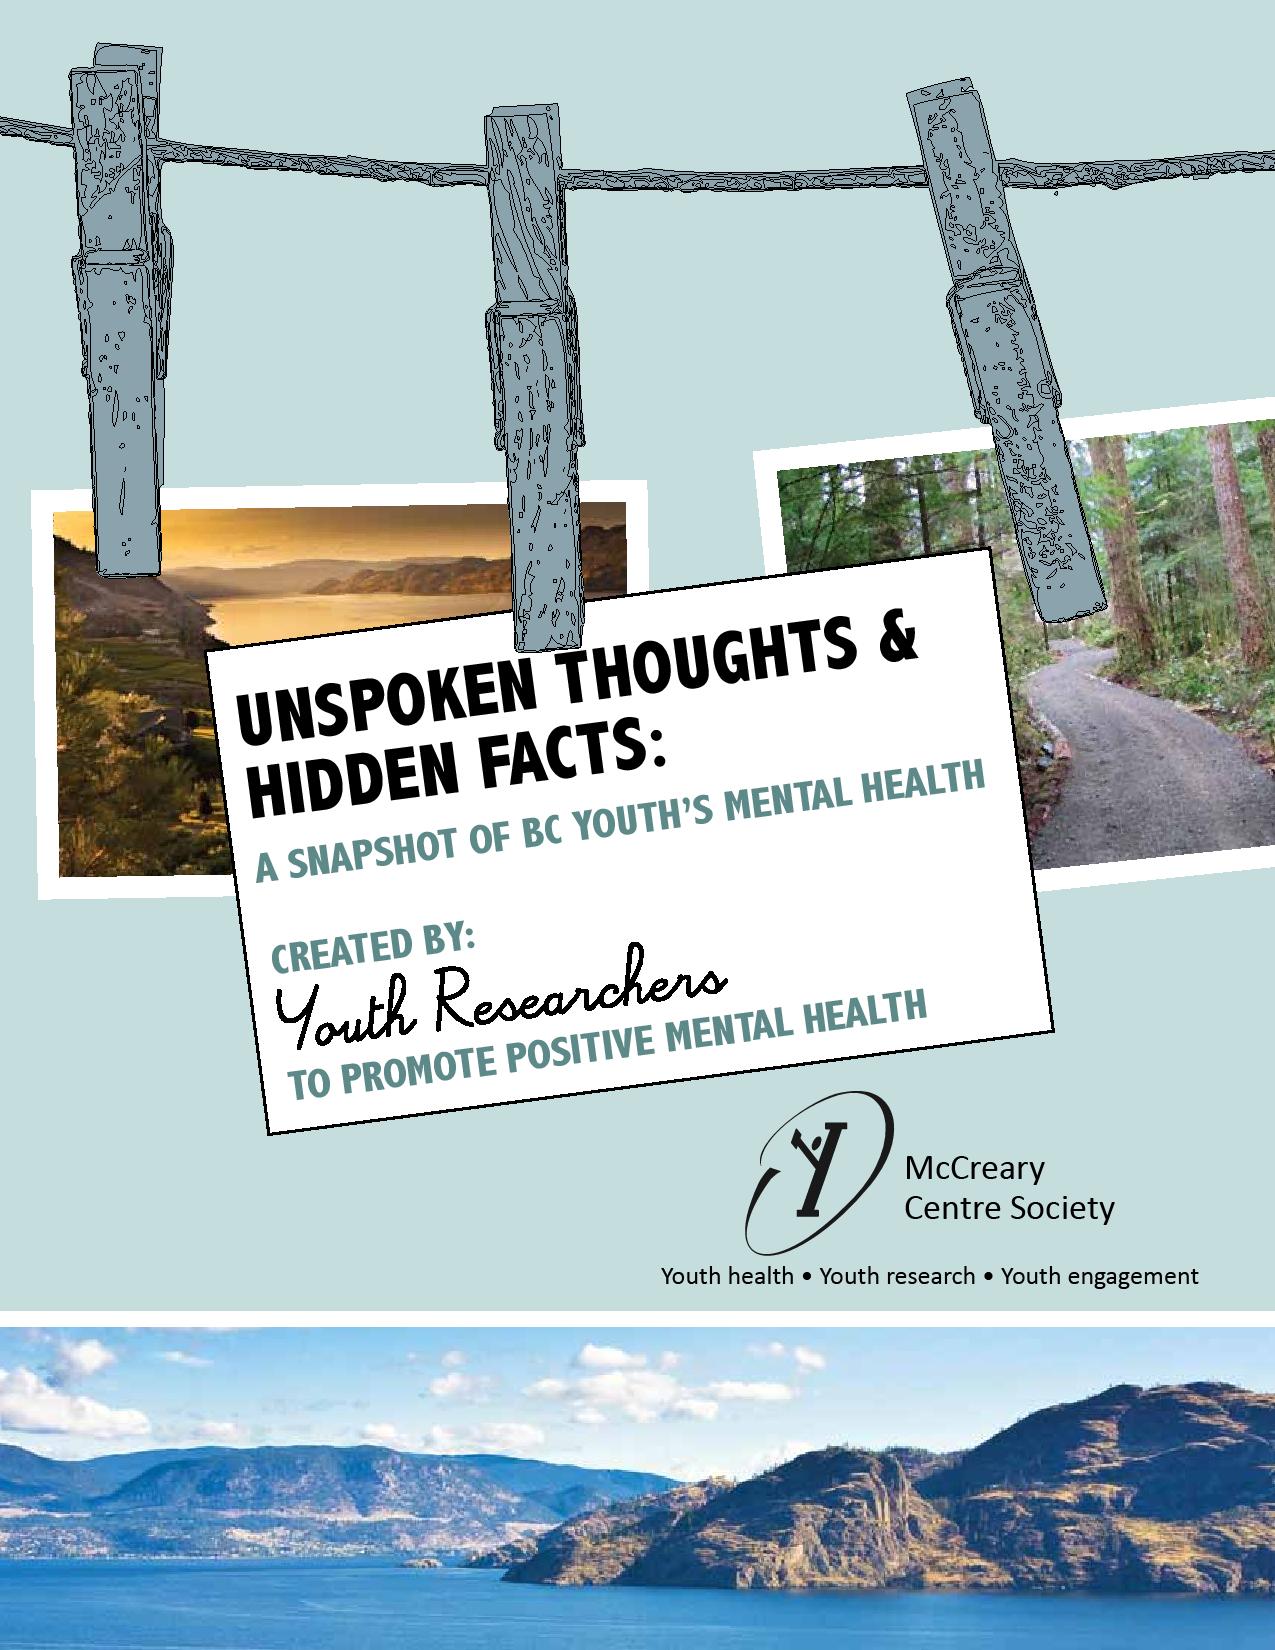 Unspoken Thoughts and Hidden Facts: A snapshot of BC youth's mental health